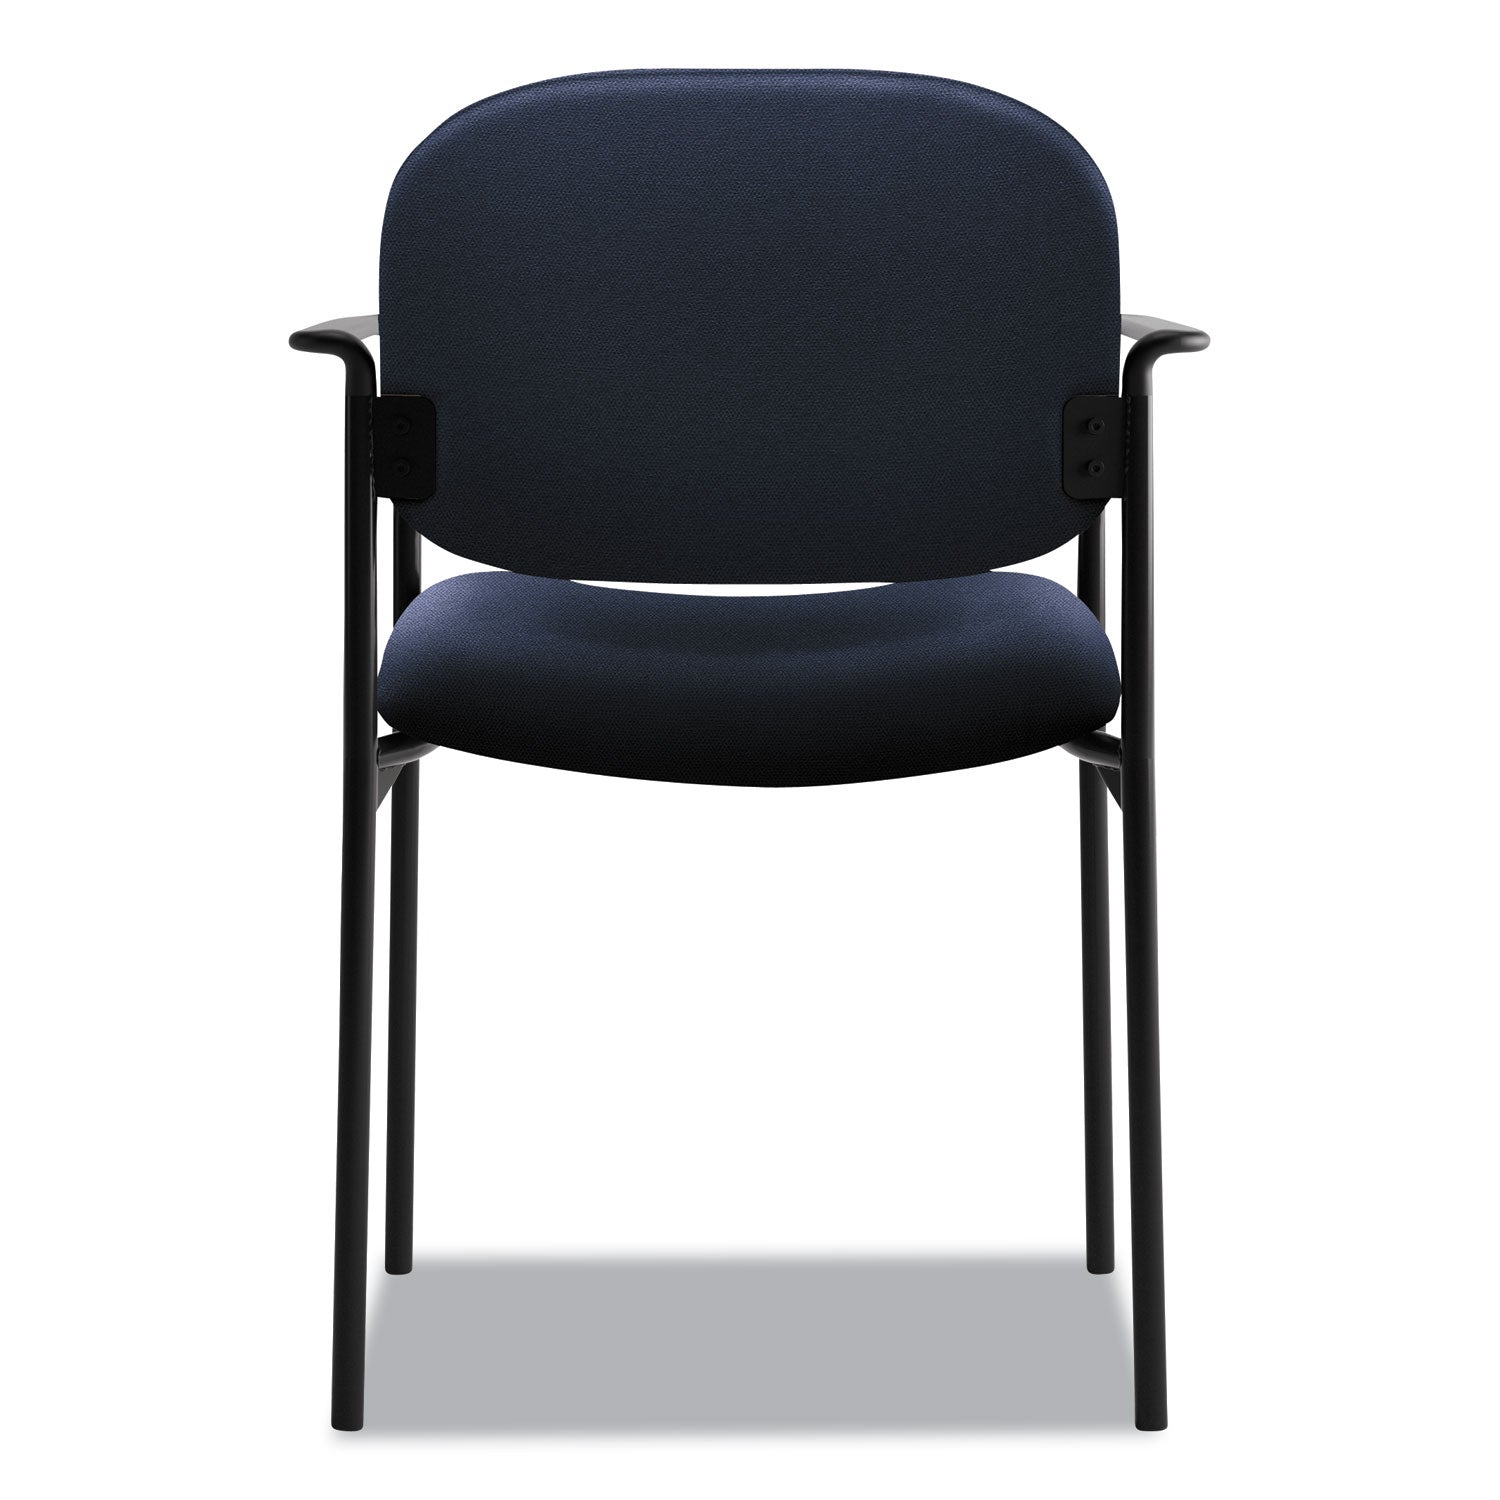 VL616 Stacking Guest Chair with Arms, Fabric Upholstery, 23.25" x 21" x 32.75", Navy Seat, Navy Back, Black Base - 